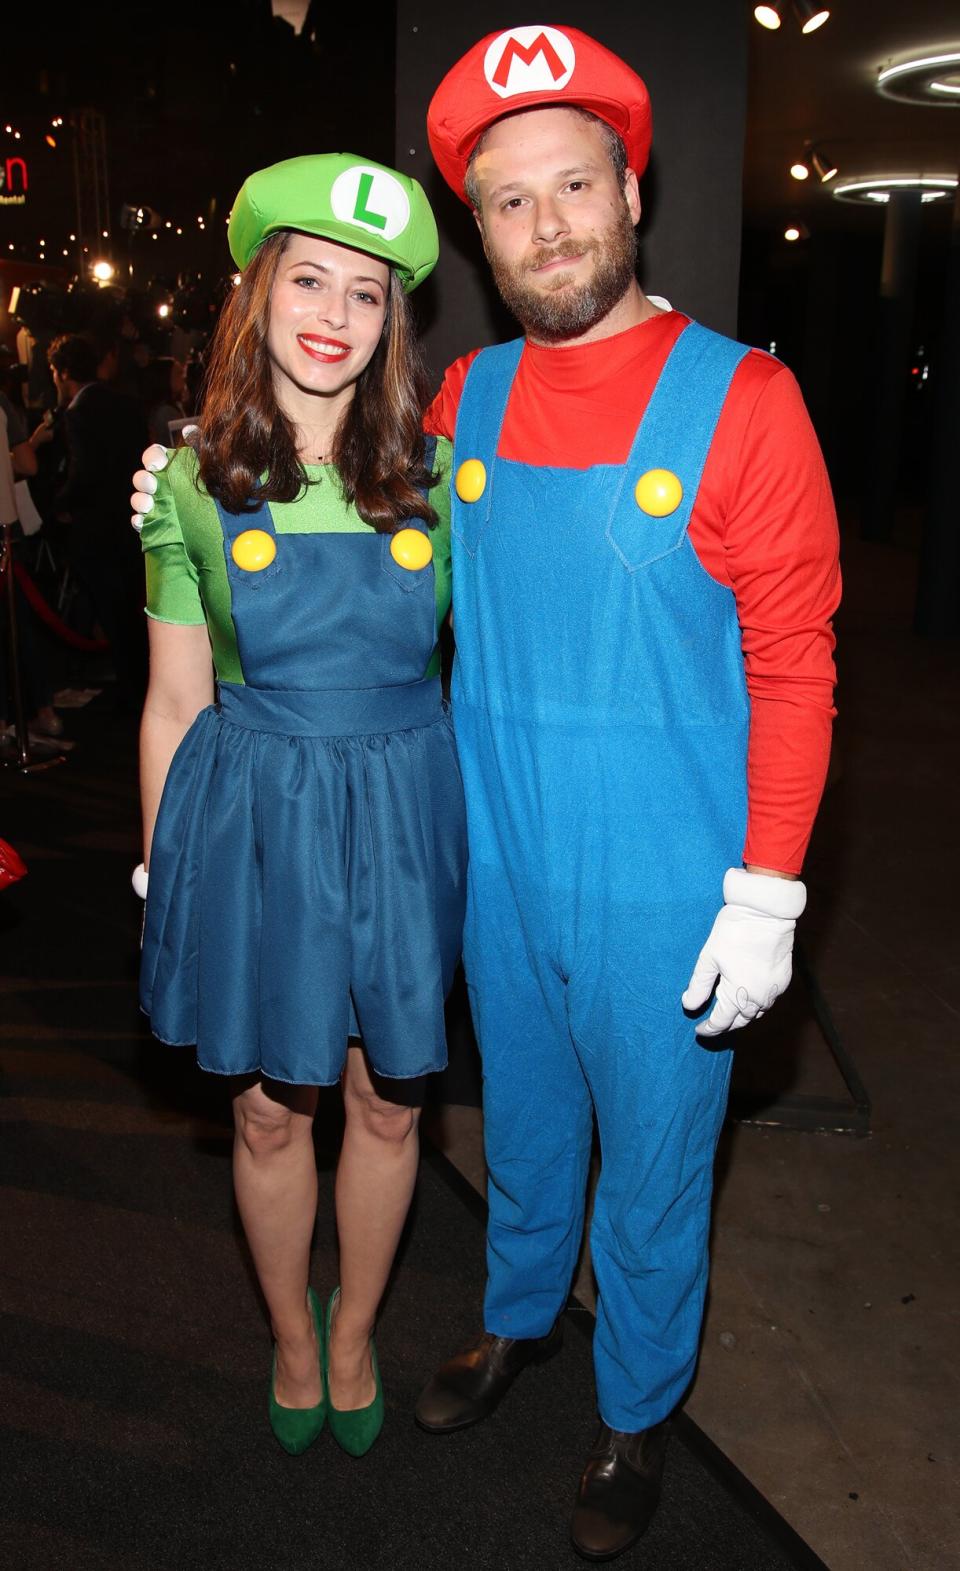 Lauren Miller (L) and and Seth Rogen attends Hilarity for Charity's 5th Annual Los Angeles Variety Show: Seth Rogen's Halloween at Hollywood Palladium on October 15, 2016 in Los Angeles, California